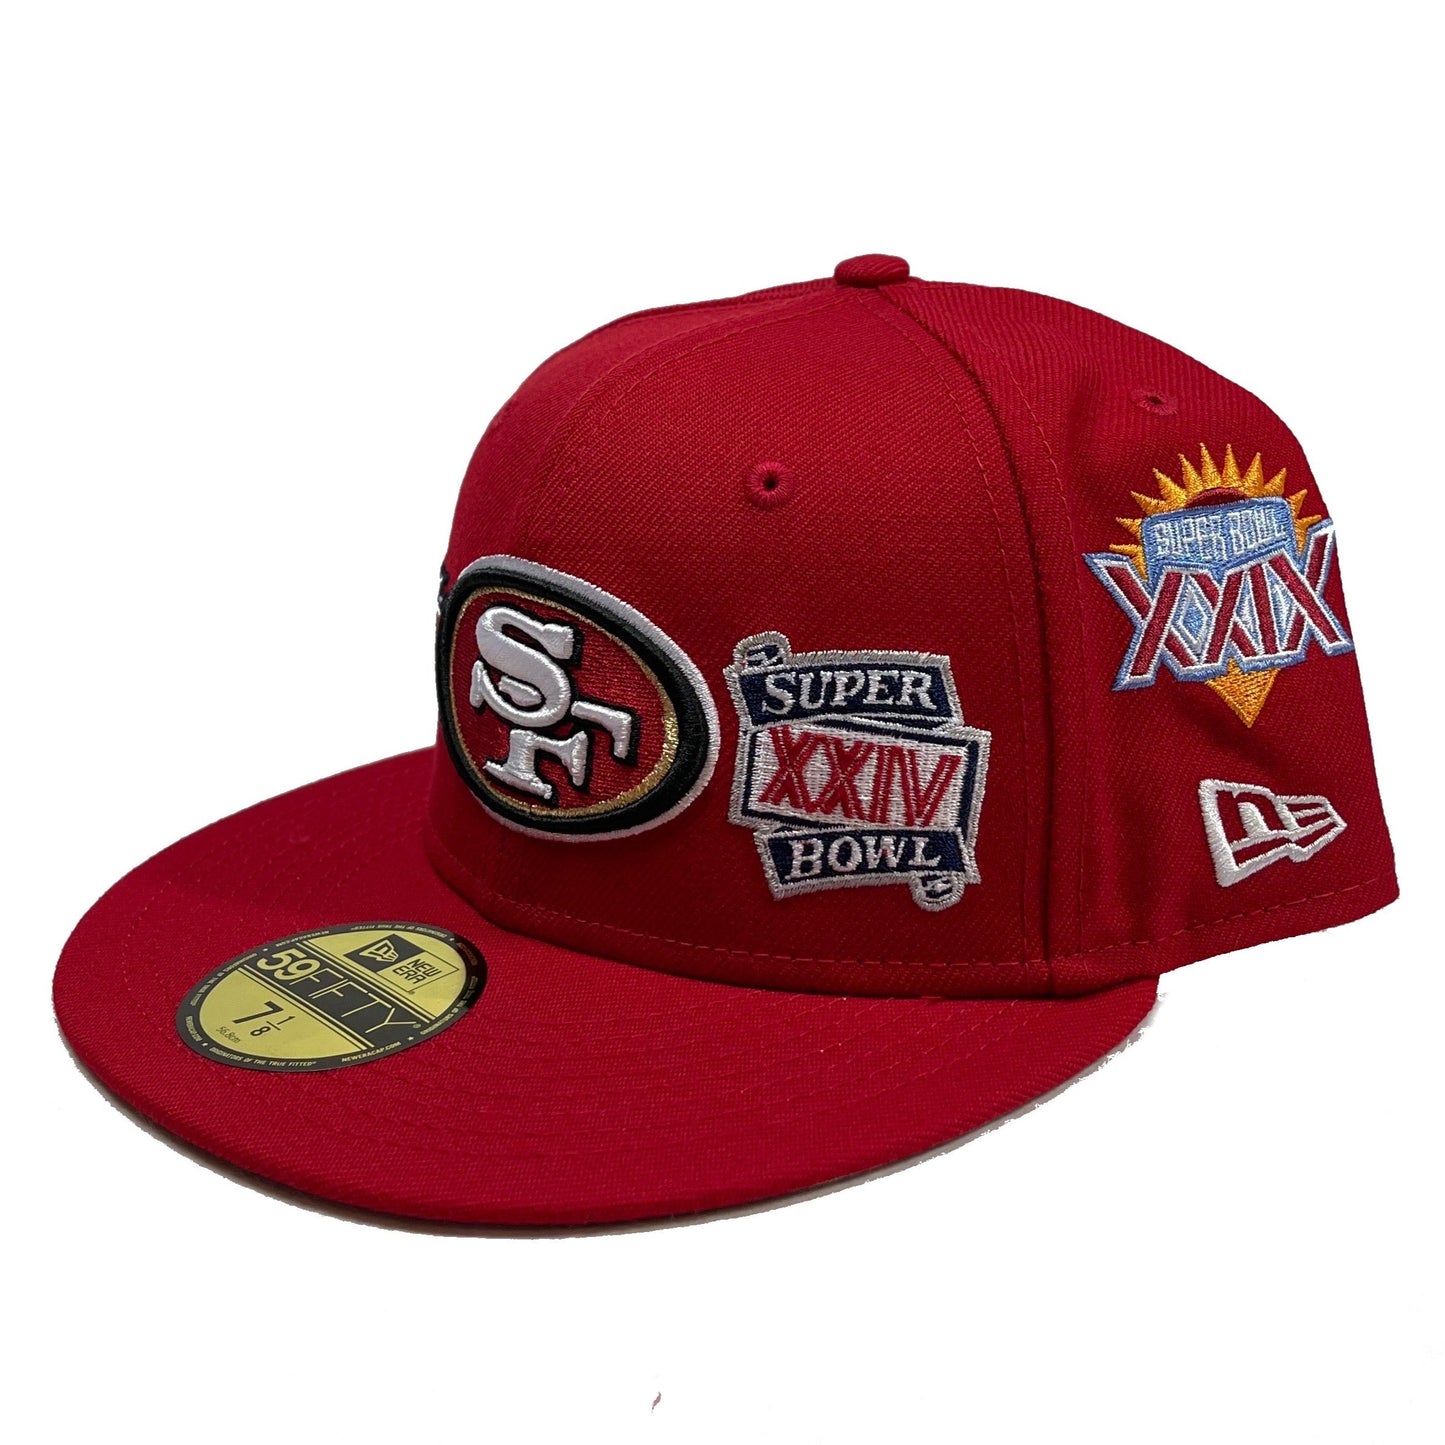 San Fransisco 49ers Super Bowl (Red) Fitted